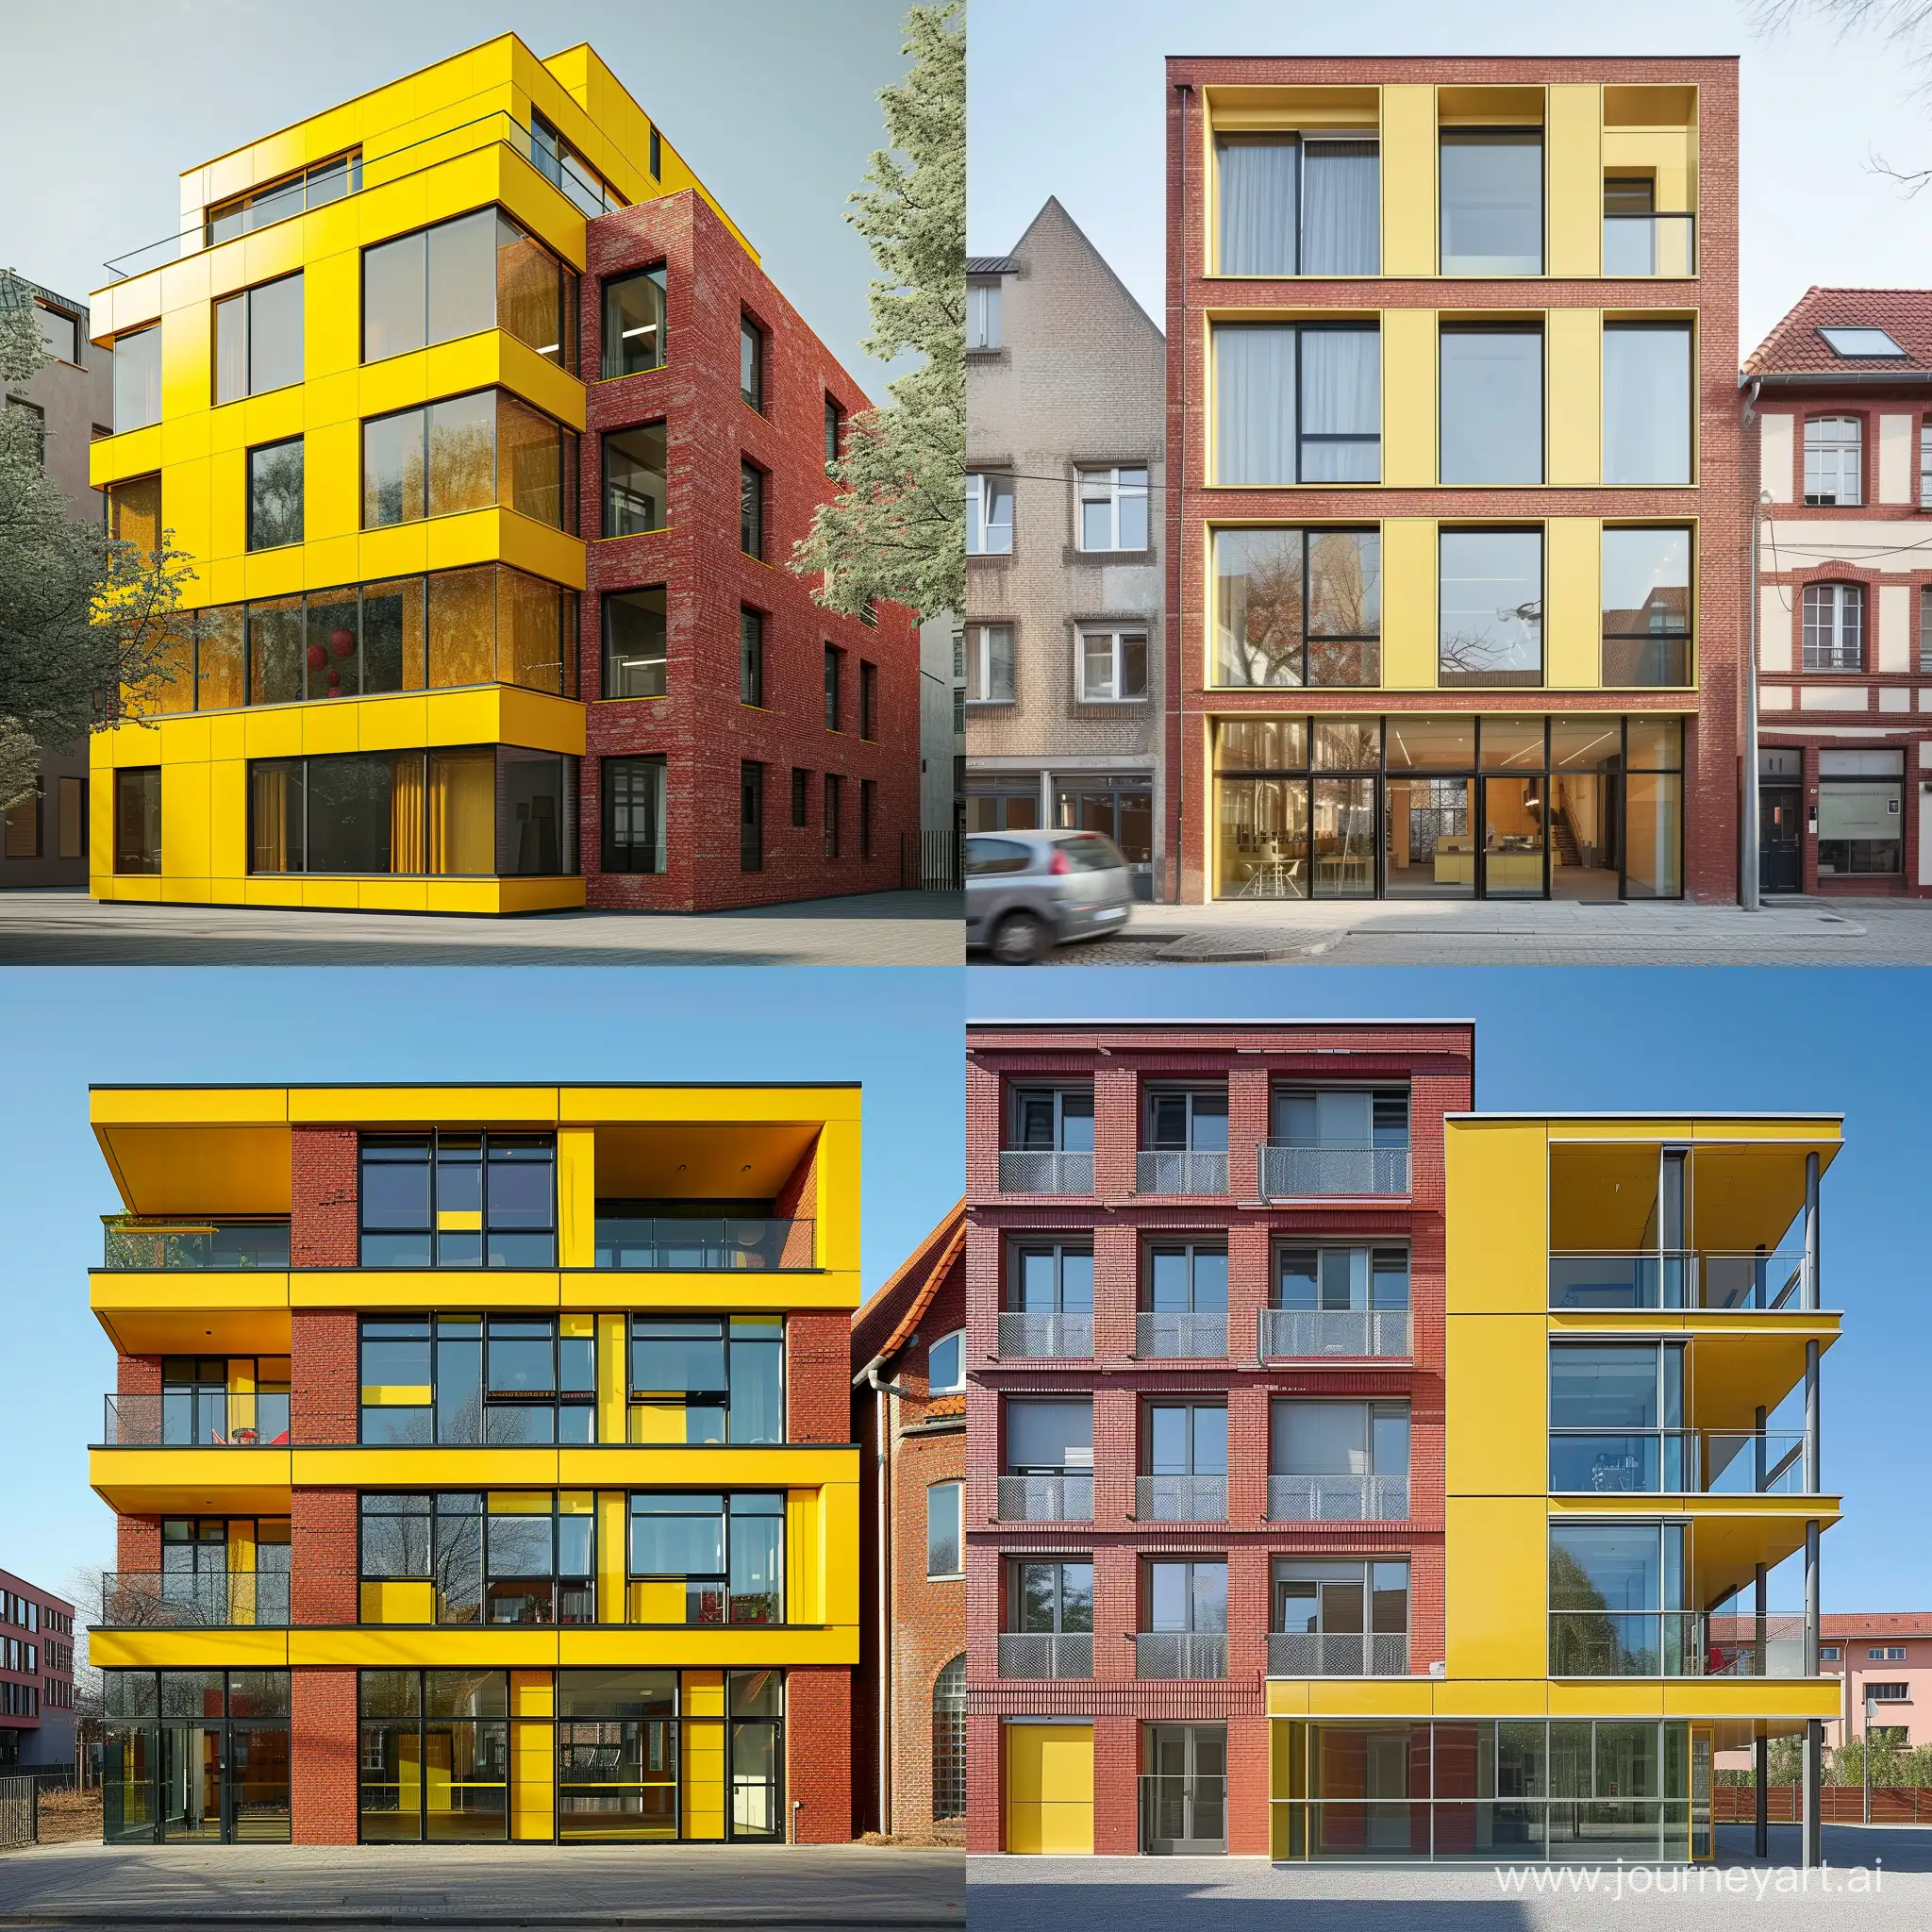 It is a 3-storey building built of red brick and glass. The facade is yellow and modern